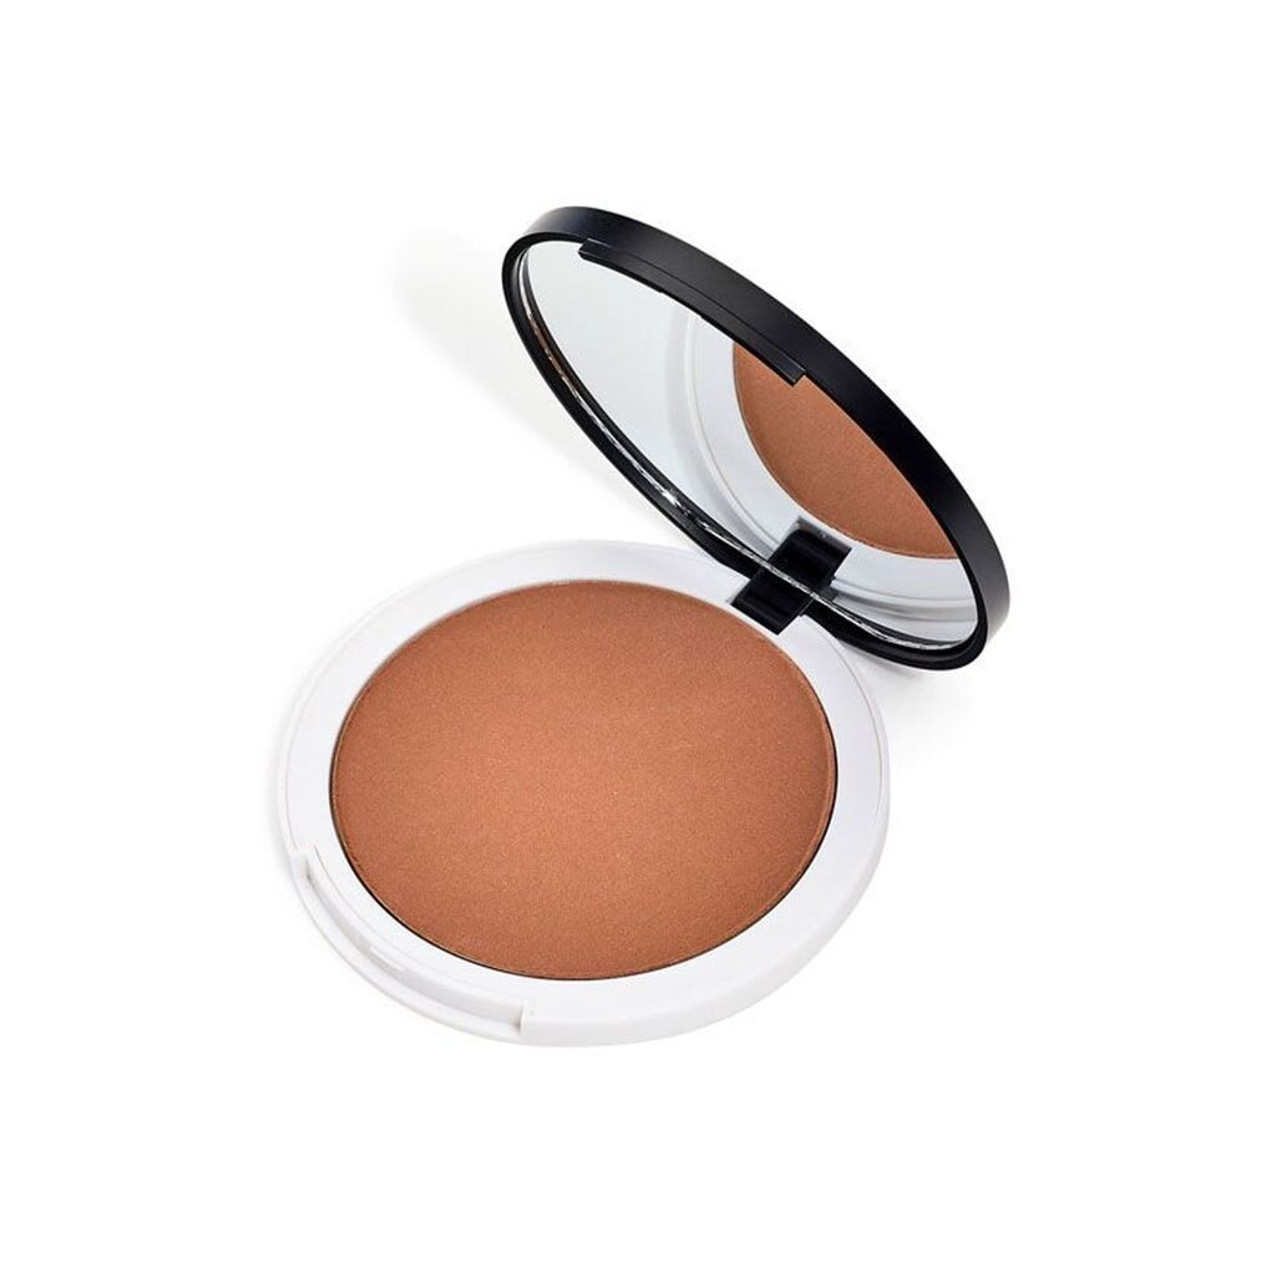 personale Rationalisering Jeg spiser morgenmad Lily Lolo Pressed Bronzer